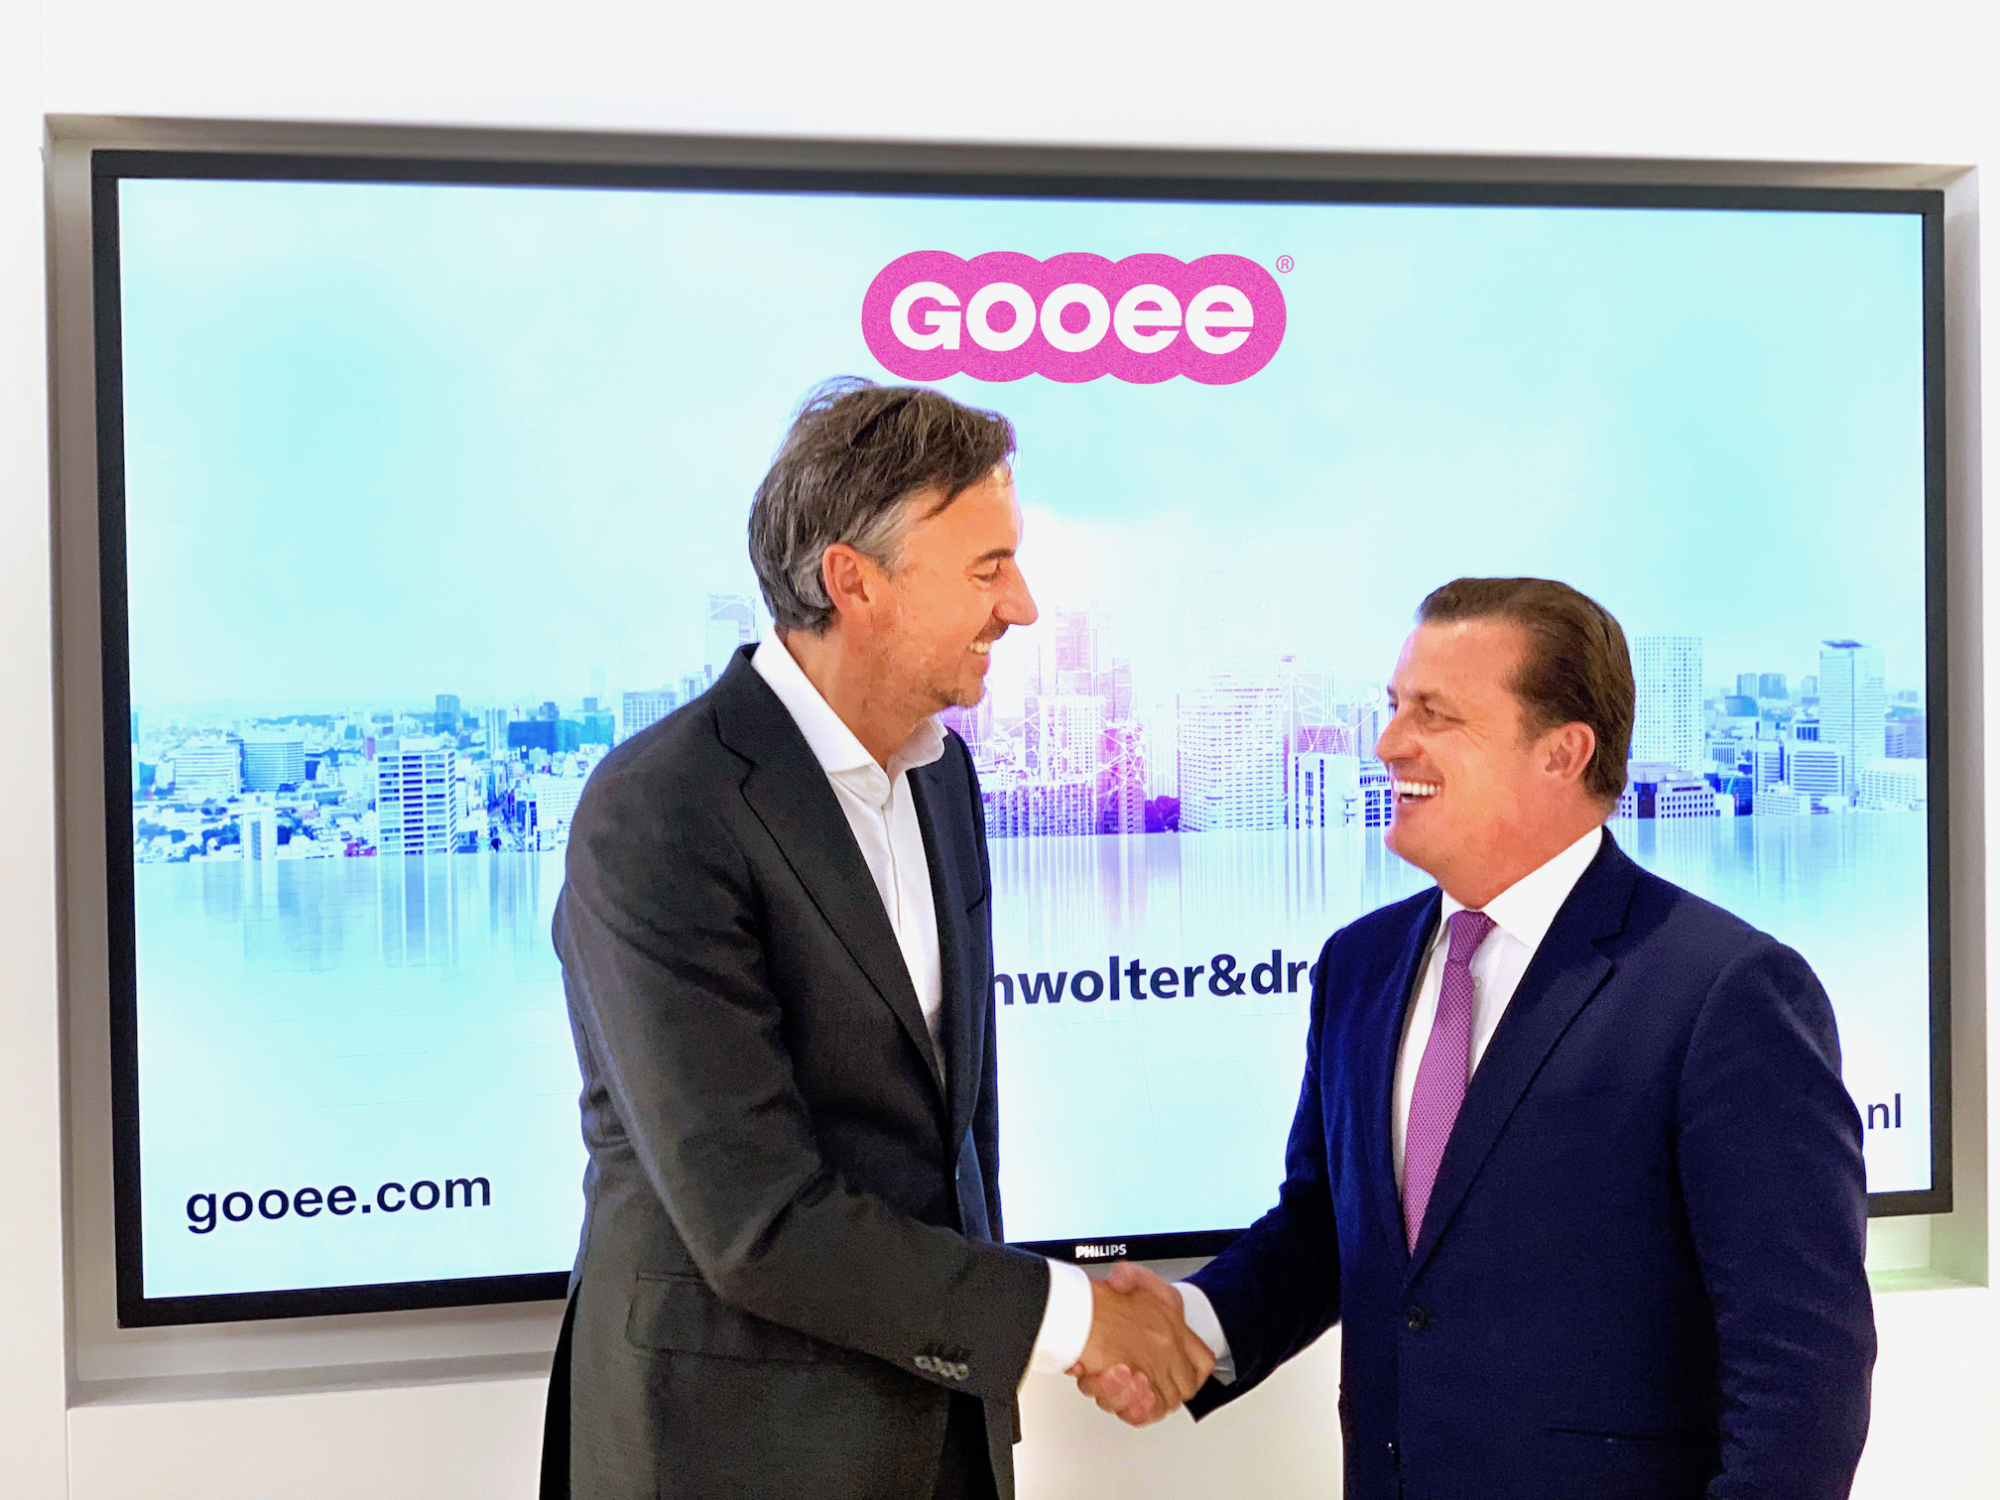 Bas Ambachtsheer, President at Croonwolter&dros and Andrew Johnson, Gooee CEO met at the Building Holland exhibition.